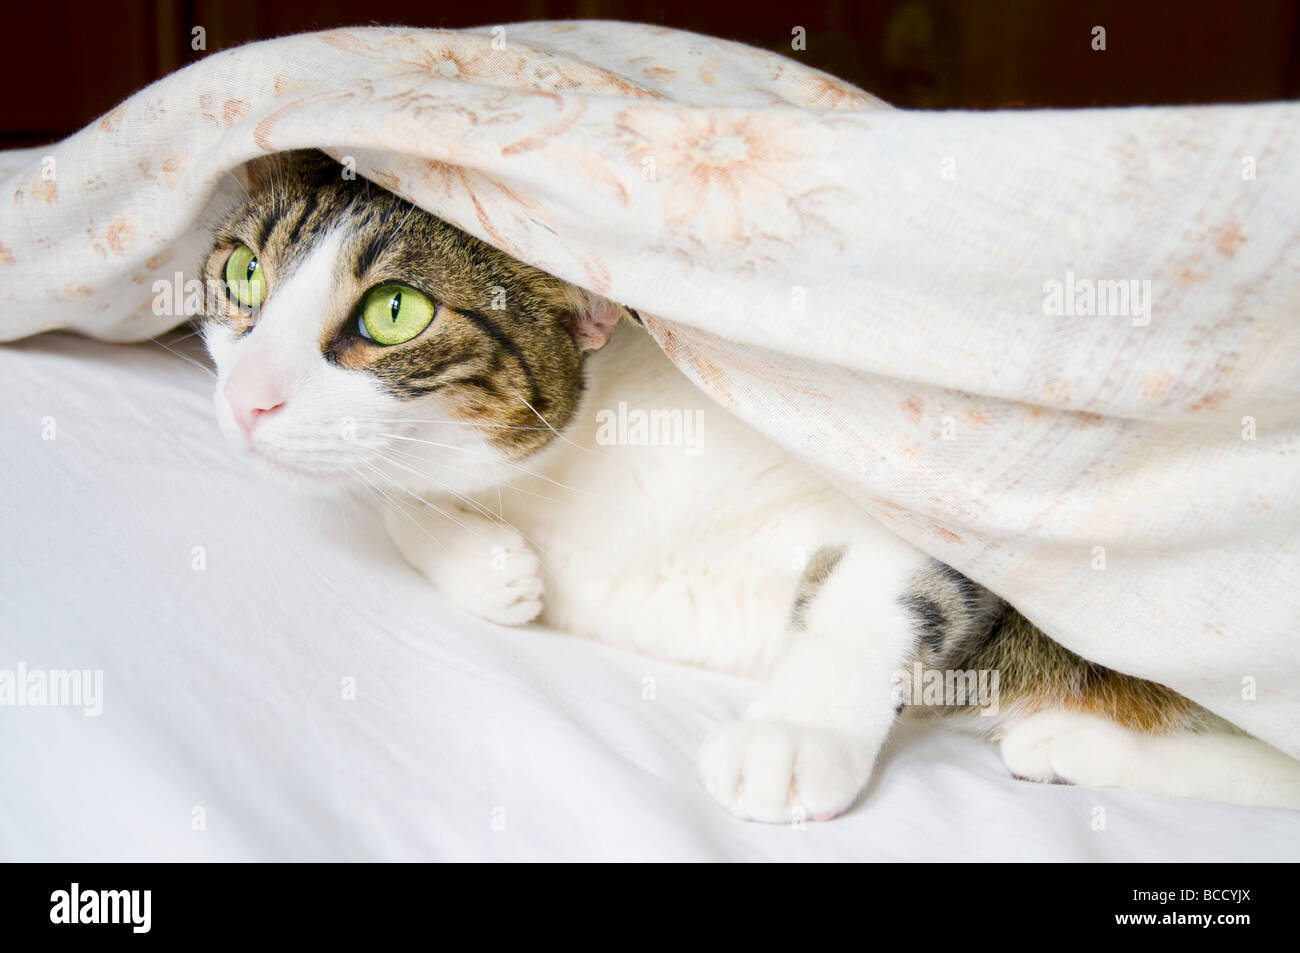 Tabby and white cat on bed, hidden under the bedspread. Stock Photo